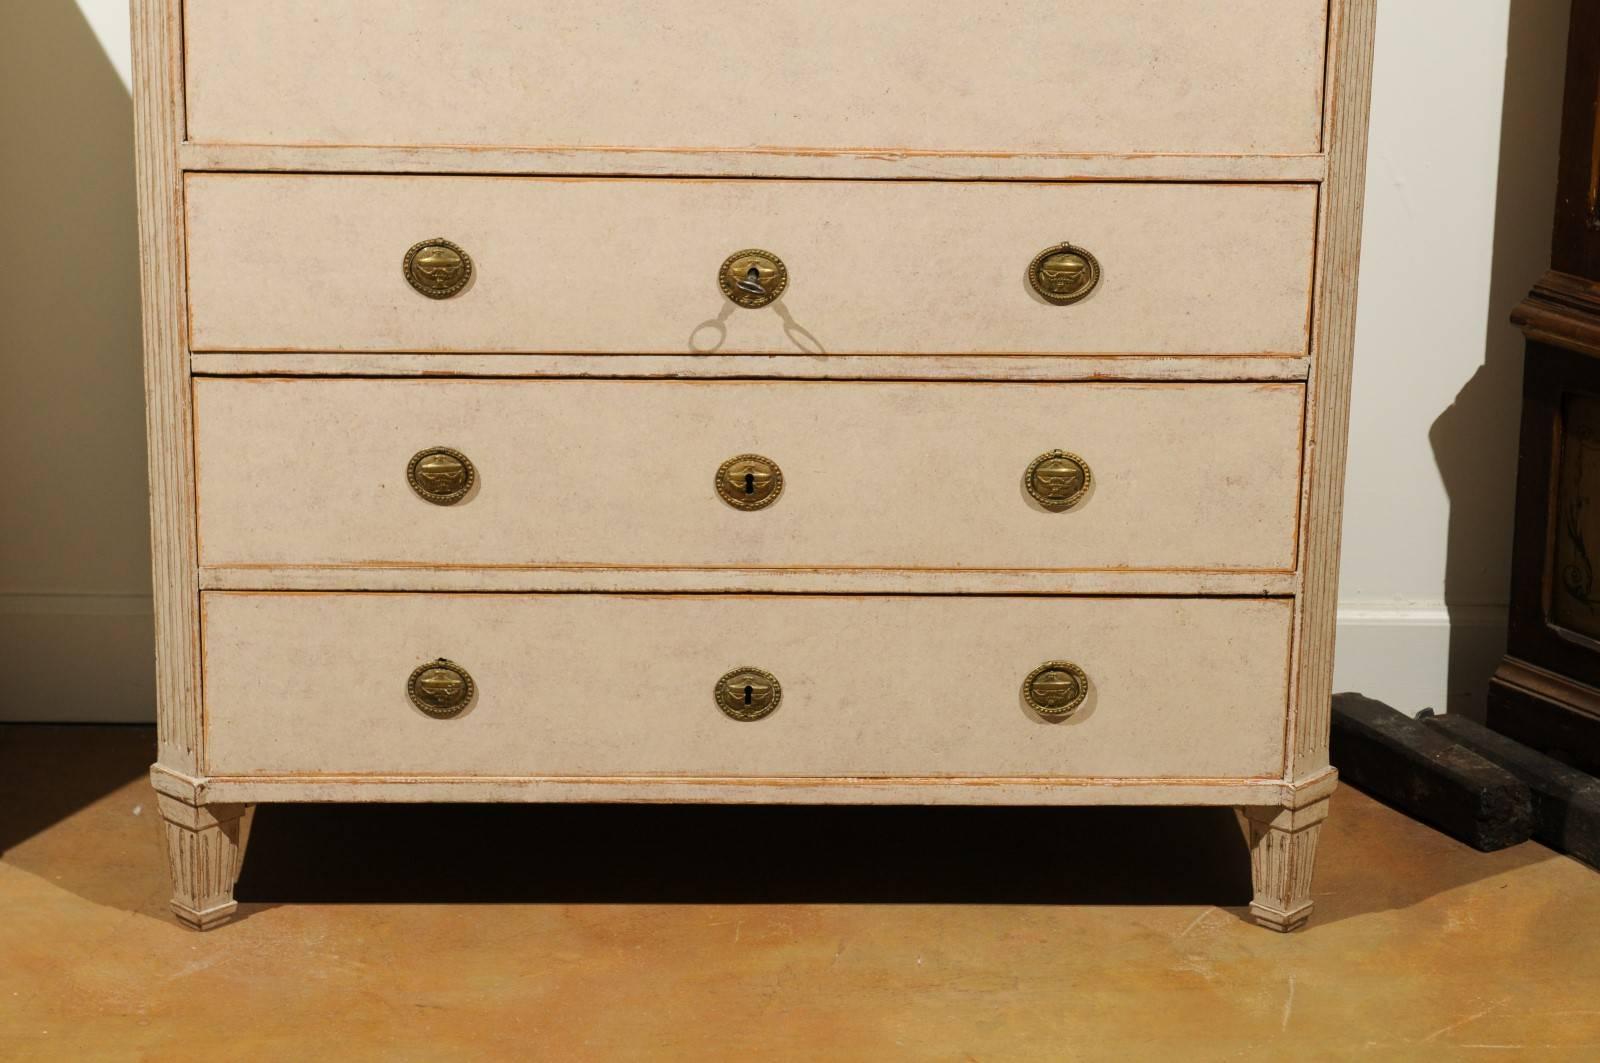 18th Century 1790s Swedish Period Gustavian Painted Drop-Front Secretary with Lower Drawers